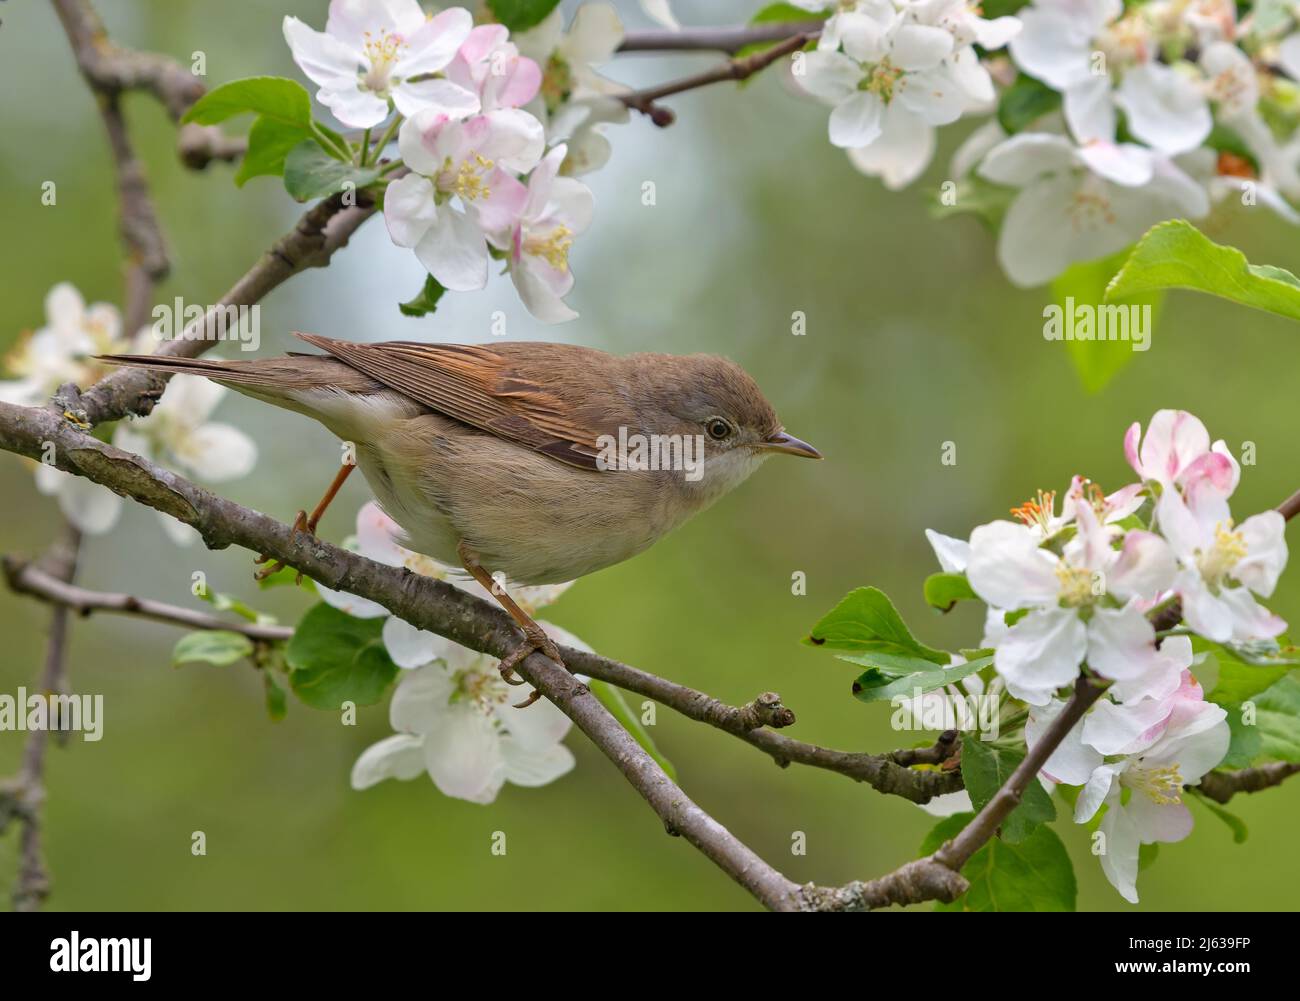 Common whitethroat (Curruca communis) perched on blossoming branch of apple tree in spring Stock Photo